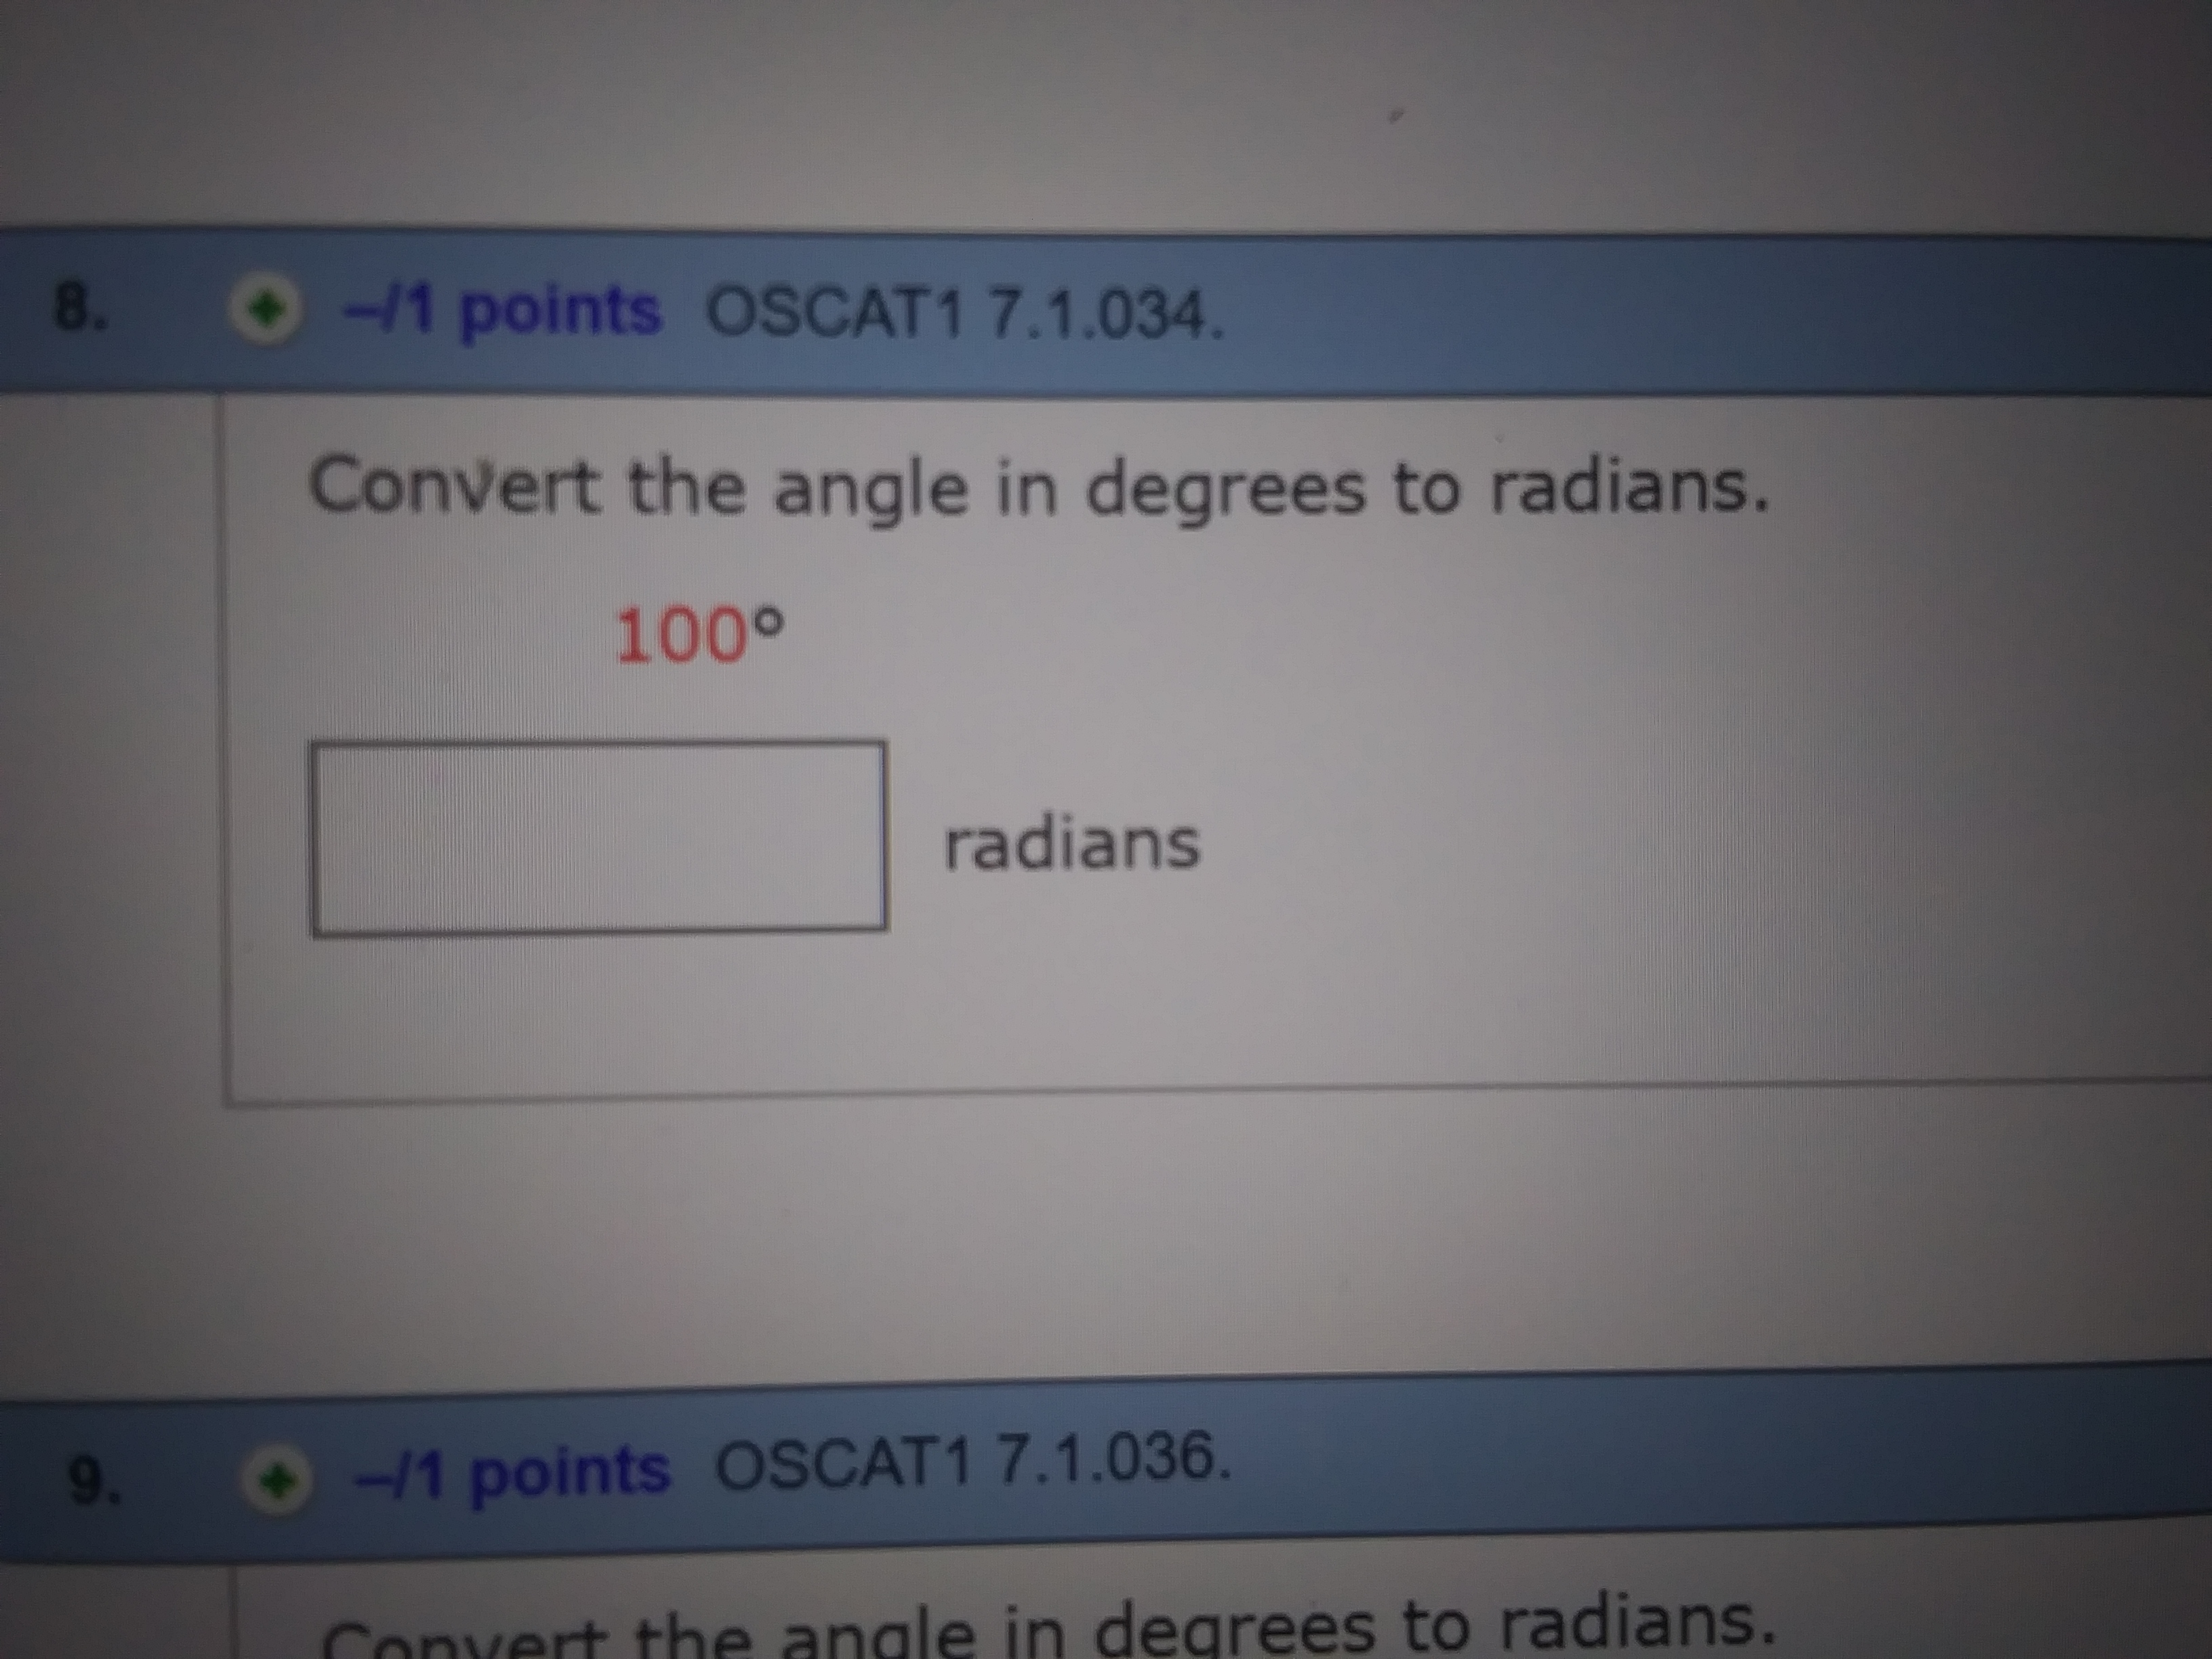 8.
-/1 points OSCAT1 7.1.034.
Convert the angle in degrees to radians.
100°
radians
9 1 points OSCAT1 7.1.036.
Convert the anale in degrees to radians.
